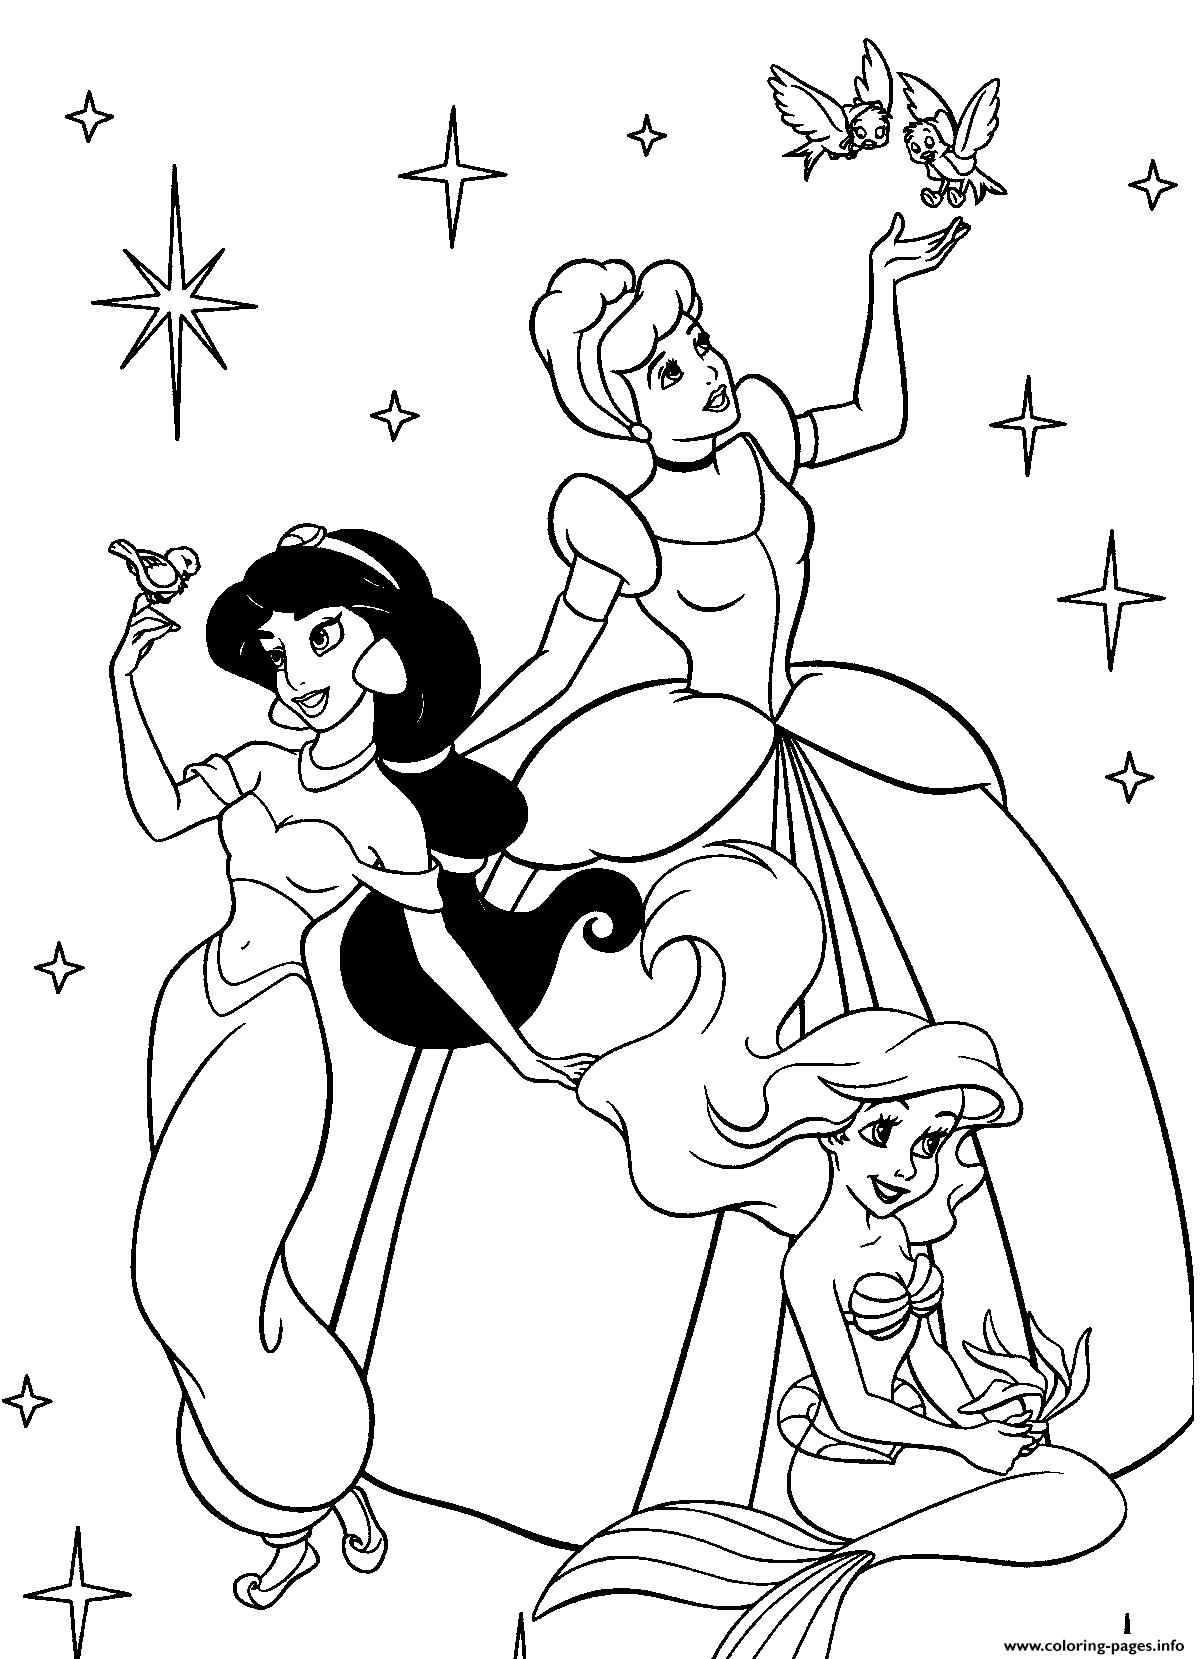 princess-coloring-pages-best-coloring-pages-for-kids-disney-princess